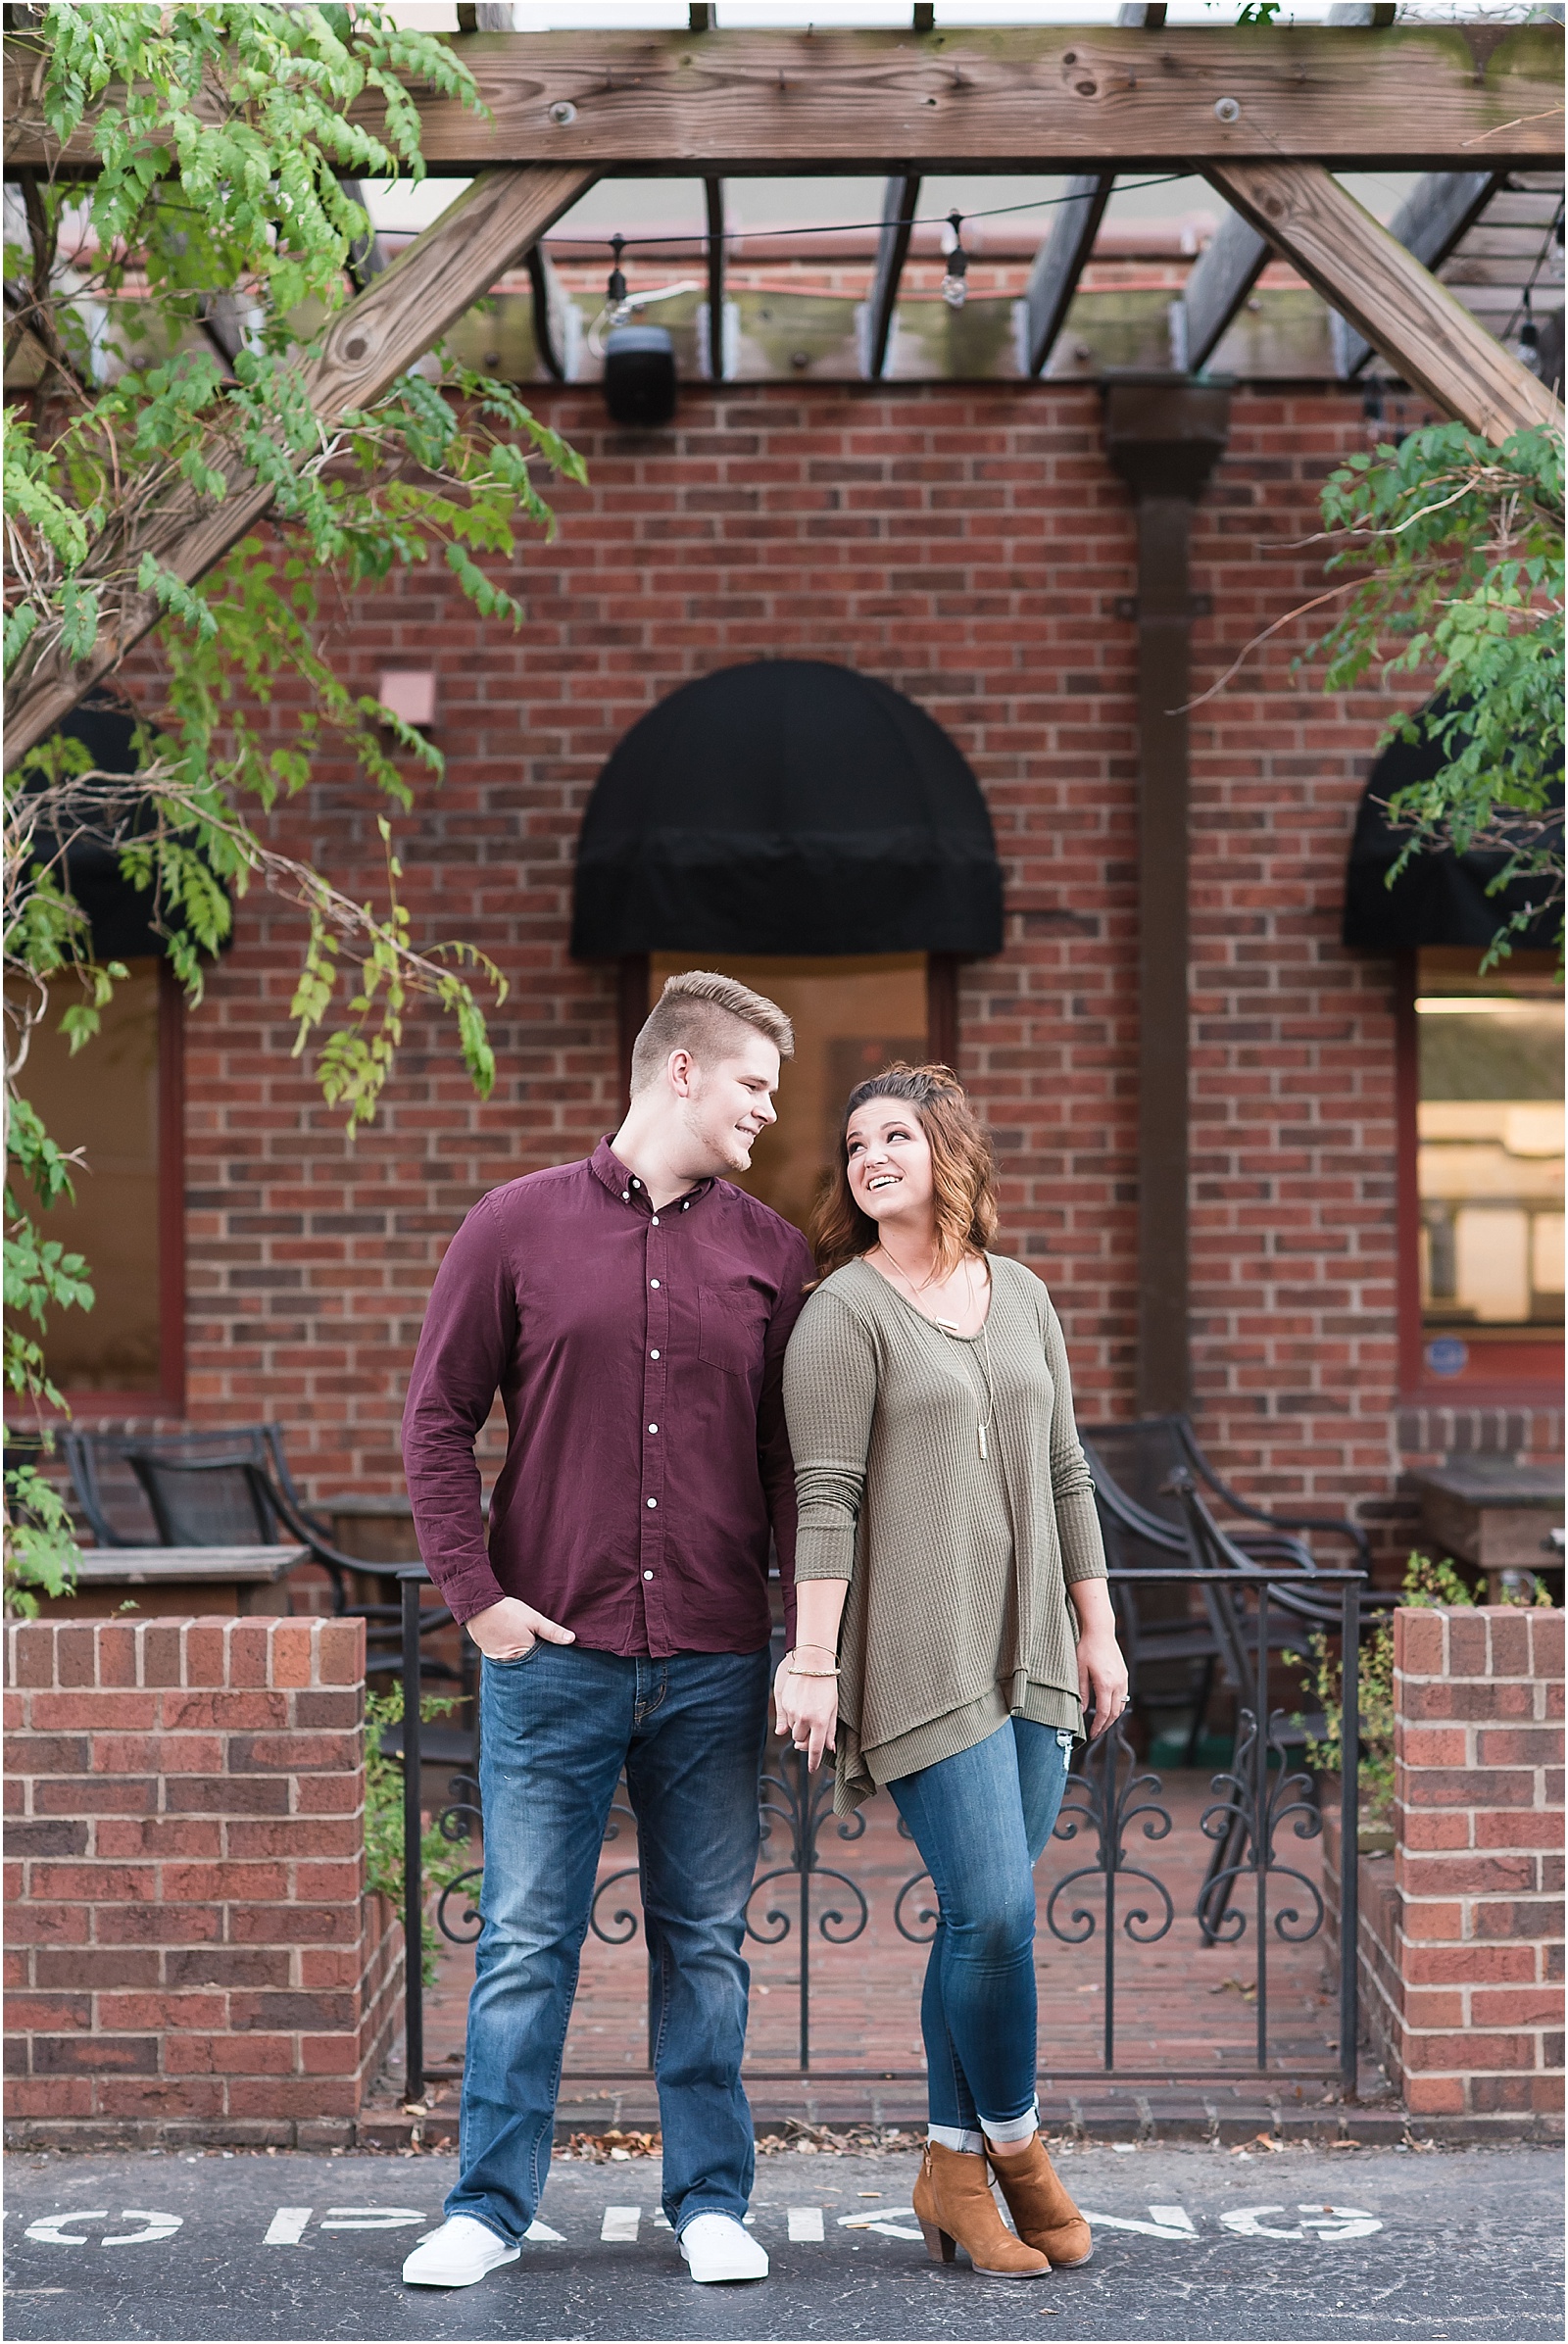 michelle and sara photography, downtown greensboro, brick engagement session, industrial engagement session, fall engagement session, fall inspired clothing, fall inspired engagement session